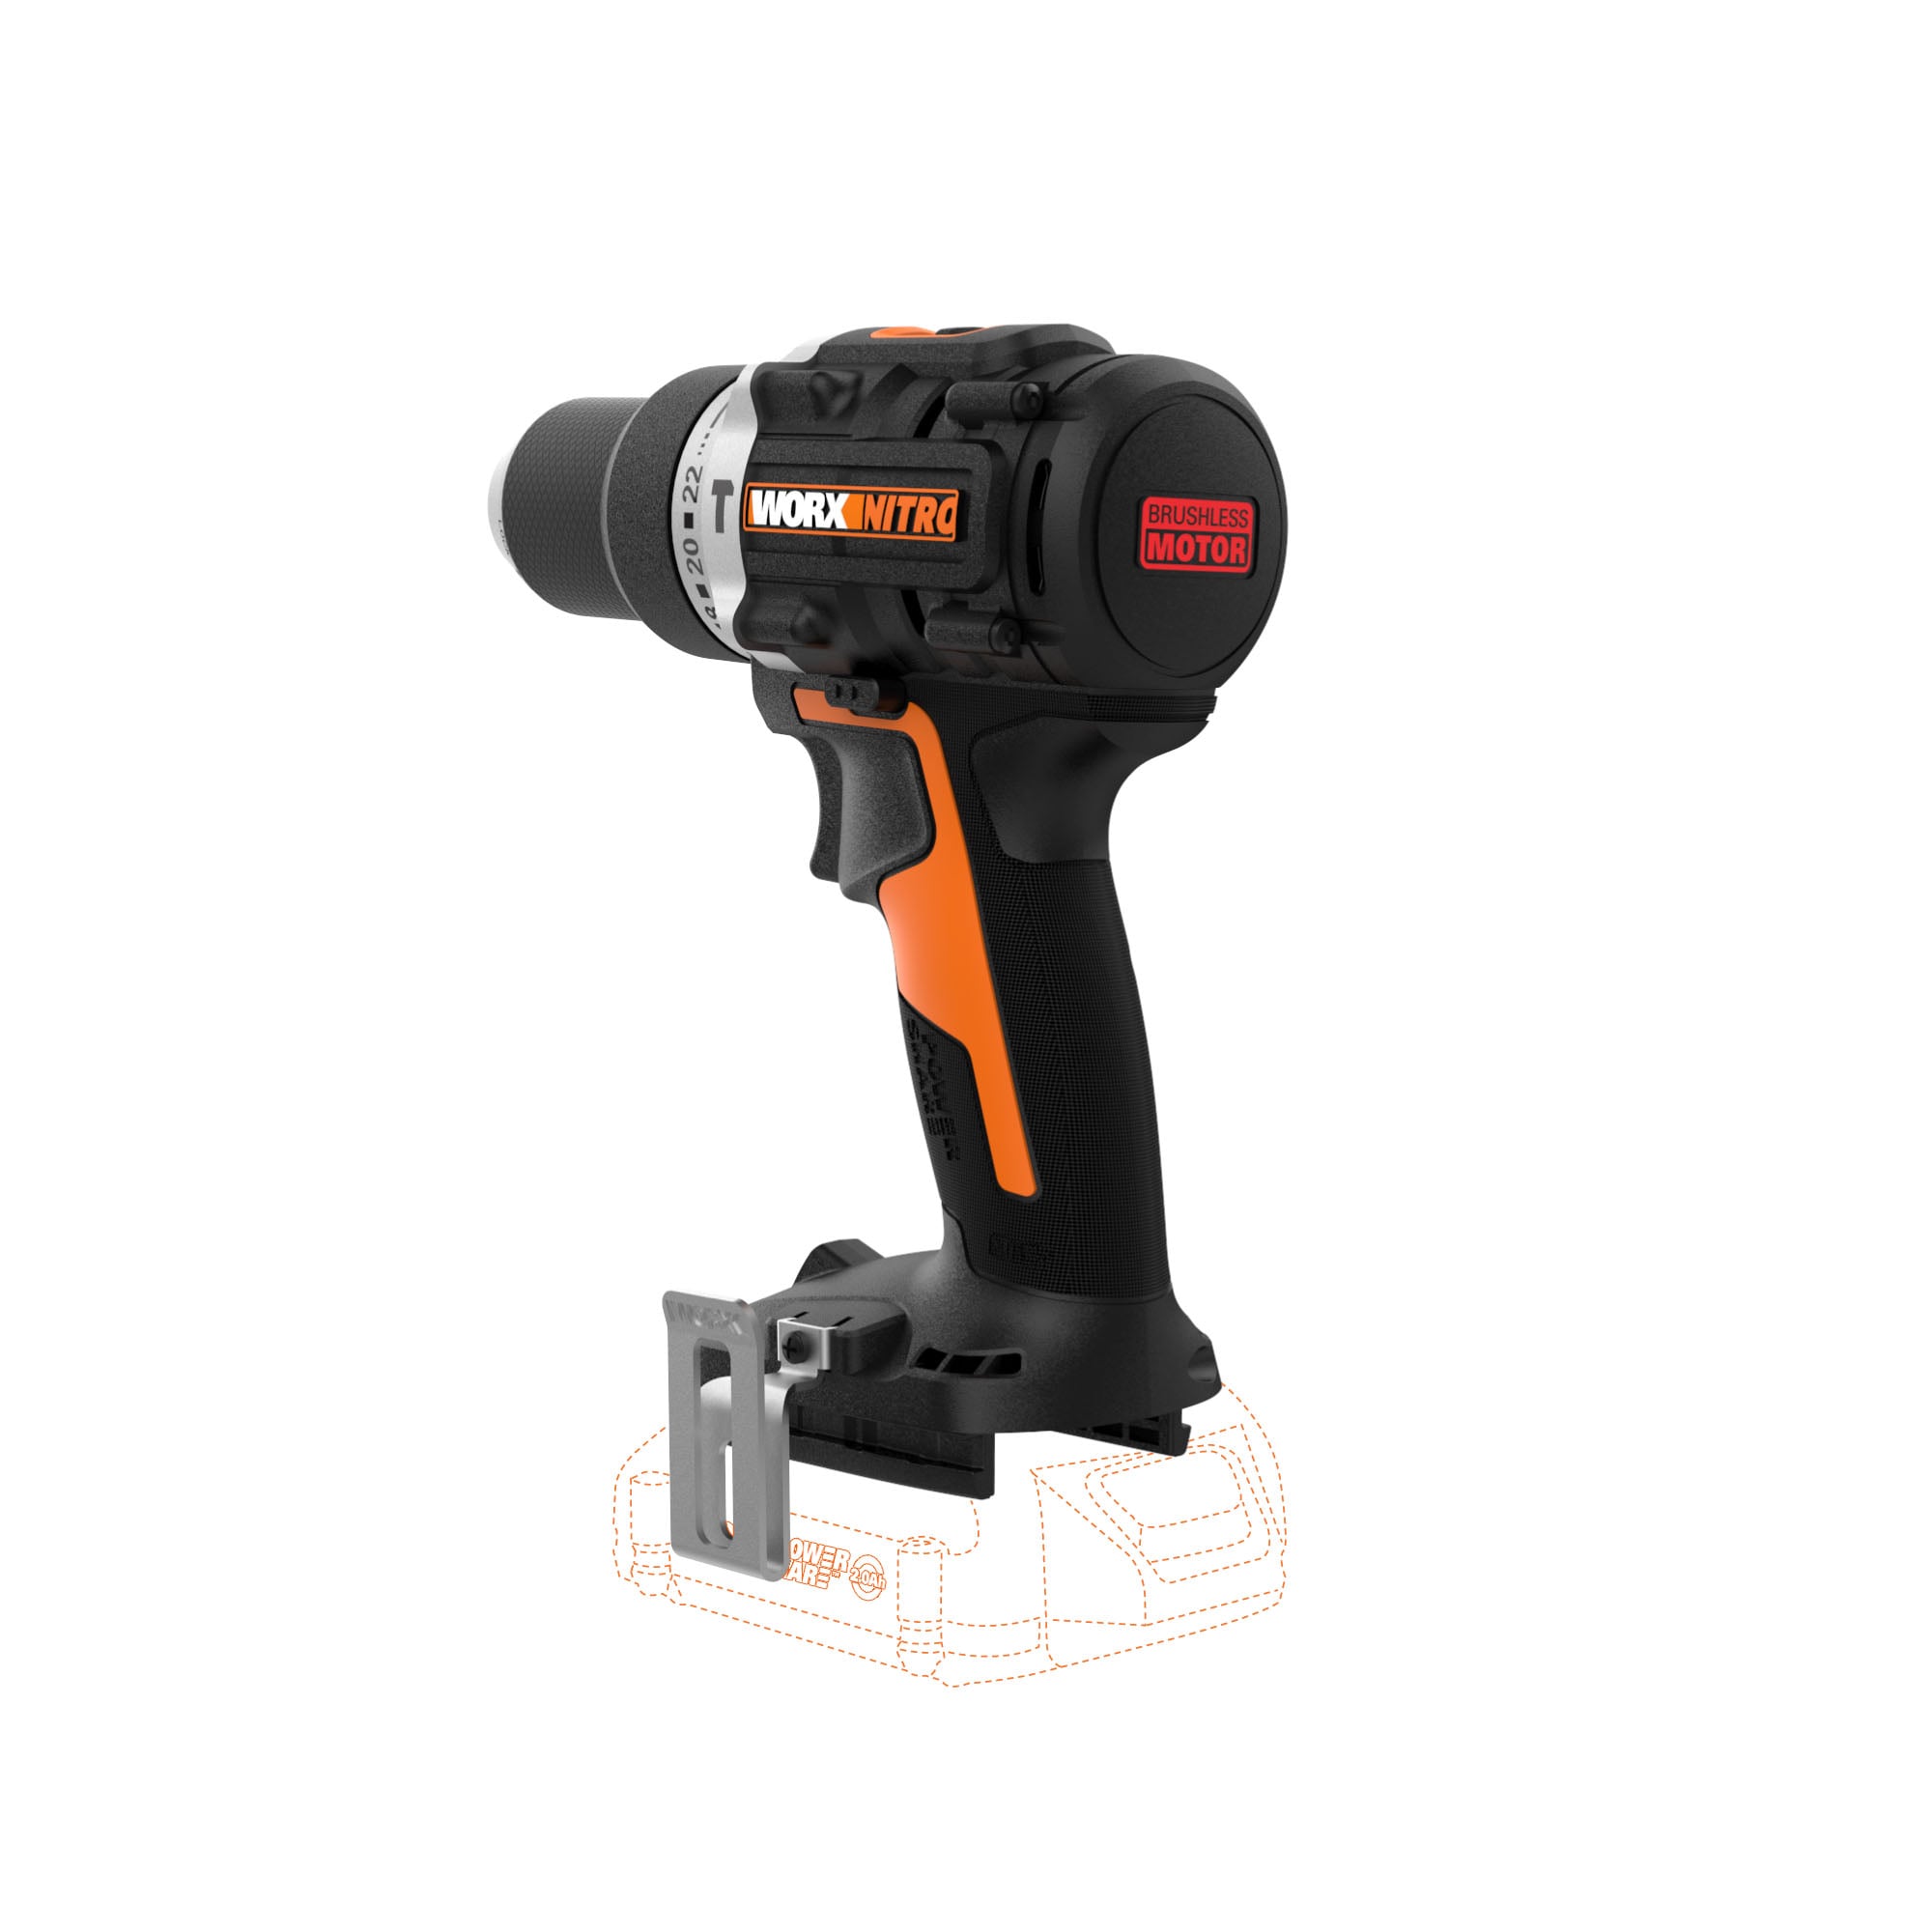 WORX Nitro Power Share 20-volt Max 1/2-in Brushless Cordless Drill ...